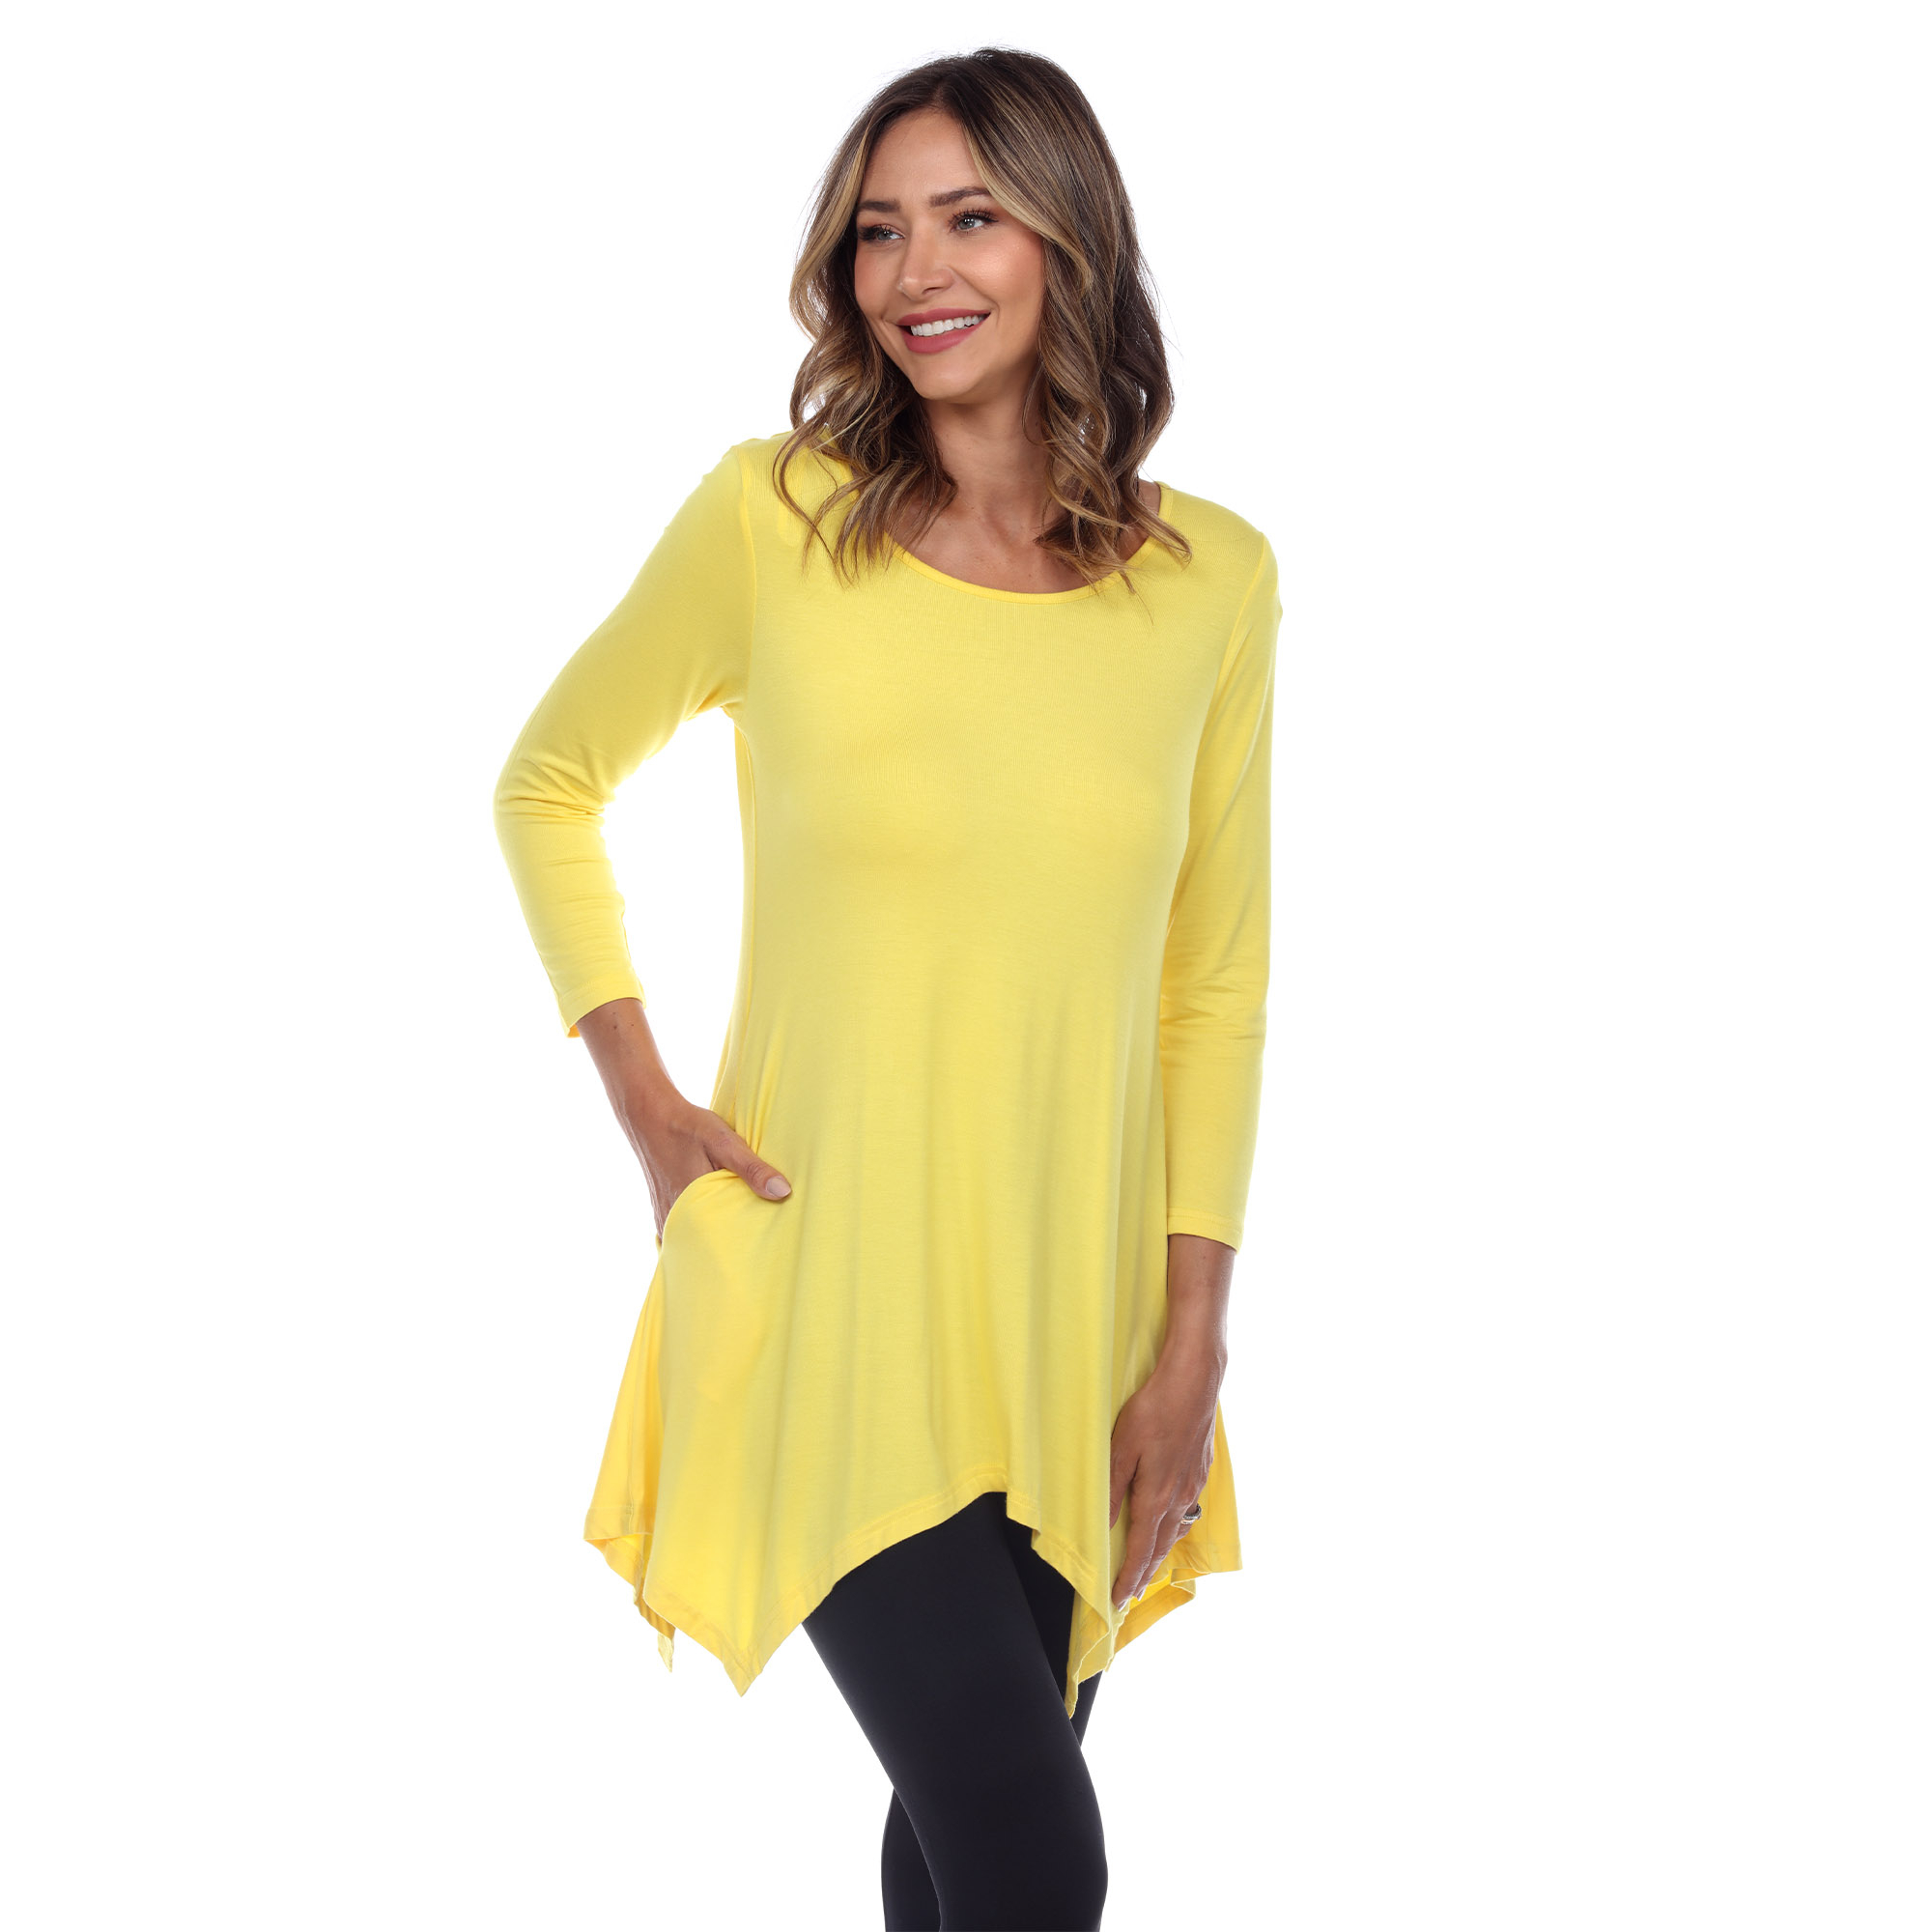 White Mark Women's Quarter Sleeve Tunic Top With Pockets - Yellow, X-Large